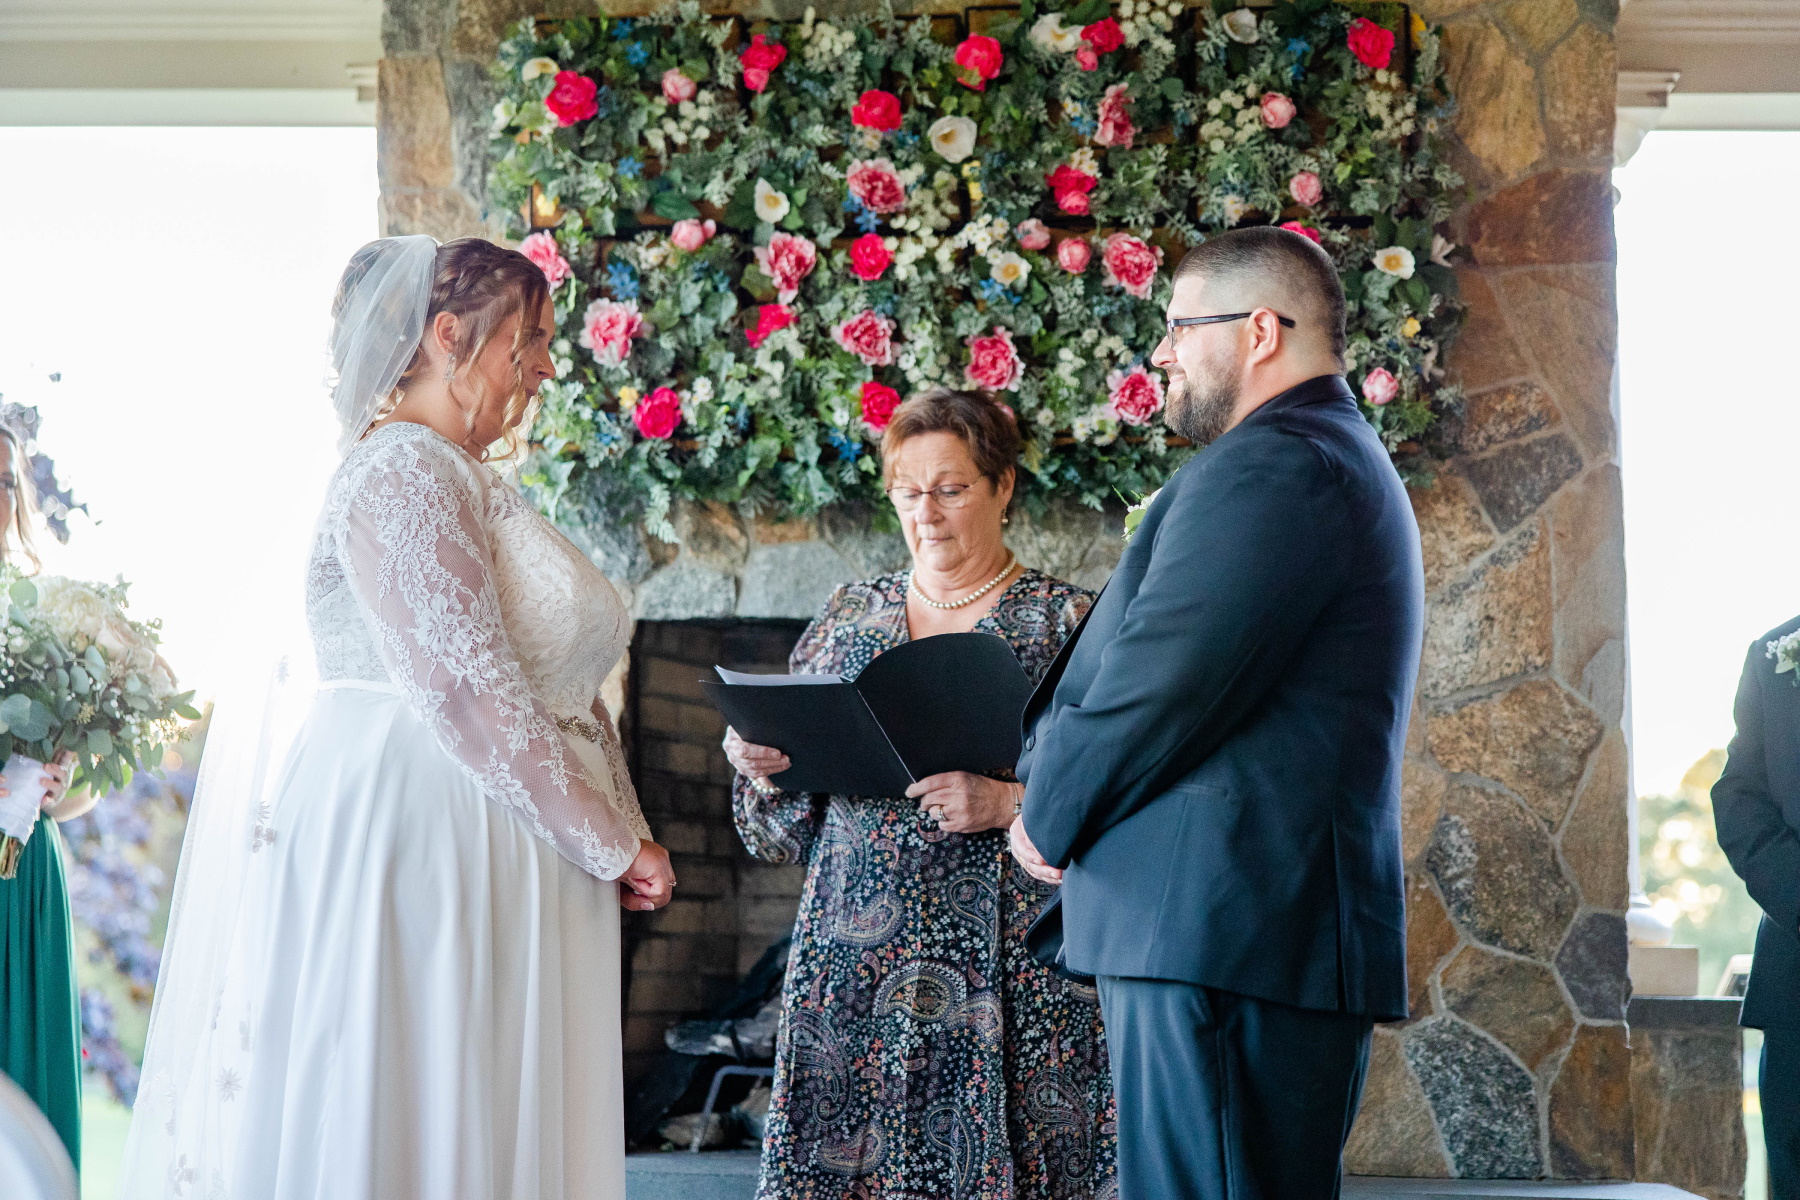 Bride and groom look lovingly at each other during ceremony at Great Neck Country Club Wedding